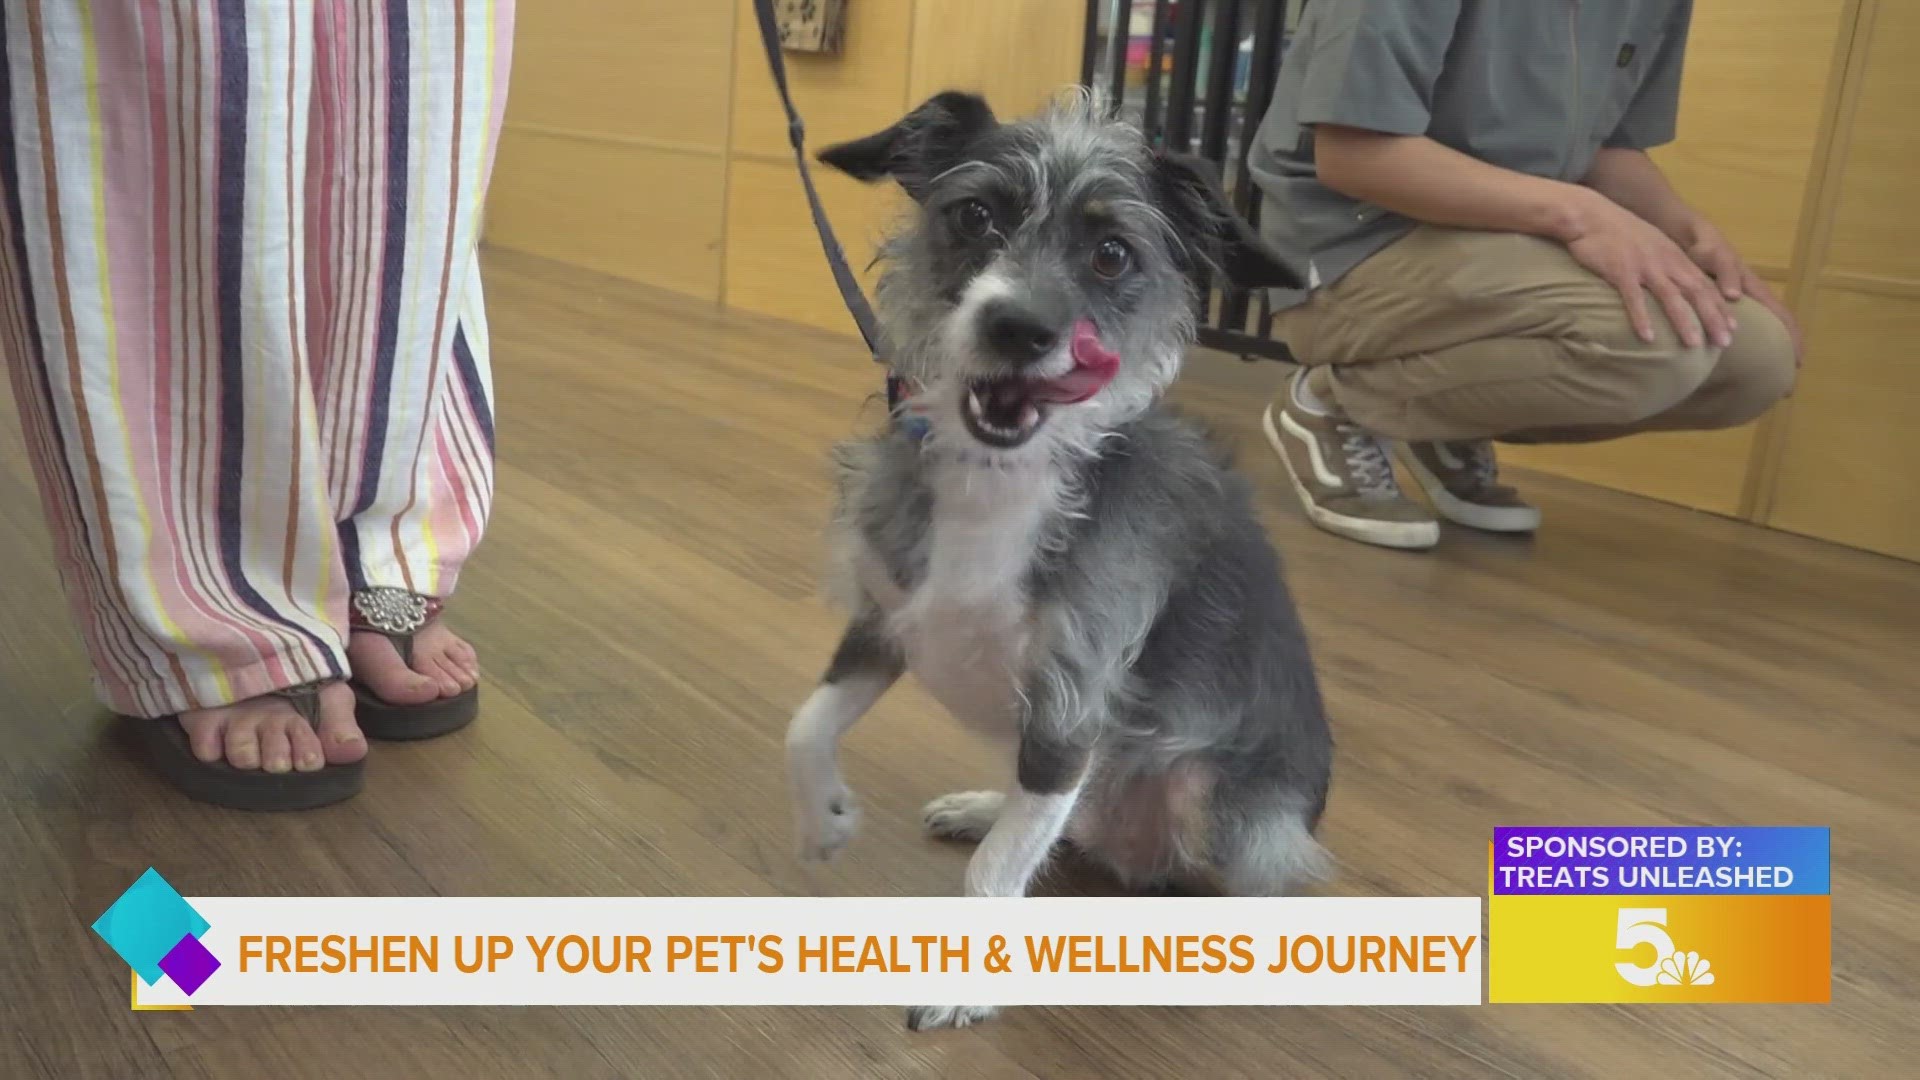 If it’s time to freshen up your pet's health and wellness journey, stop by Treats Unleashed on April 27 for the Find Your Fit event.